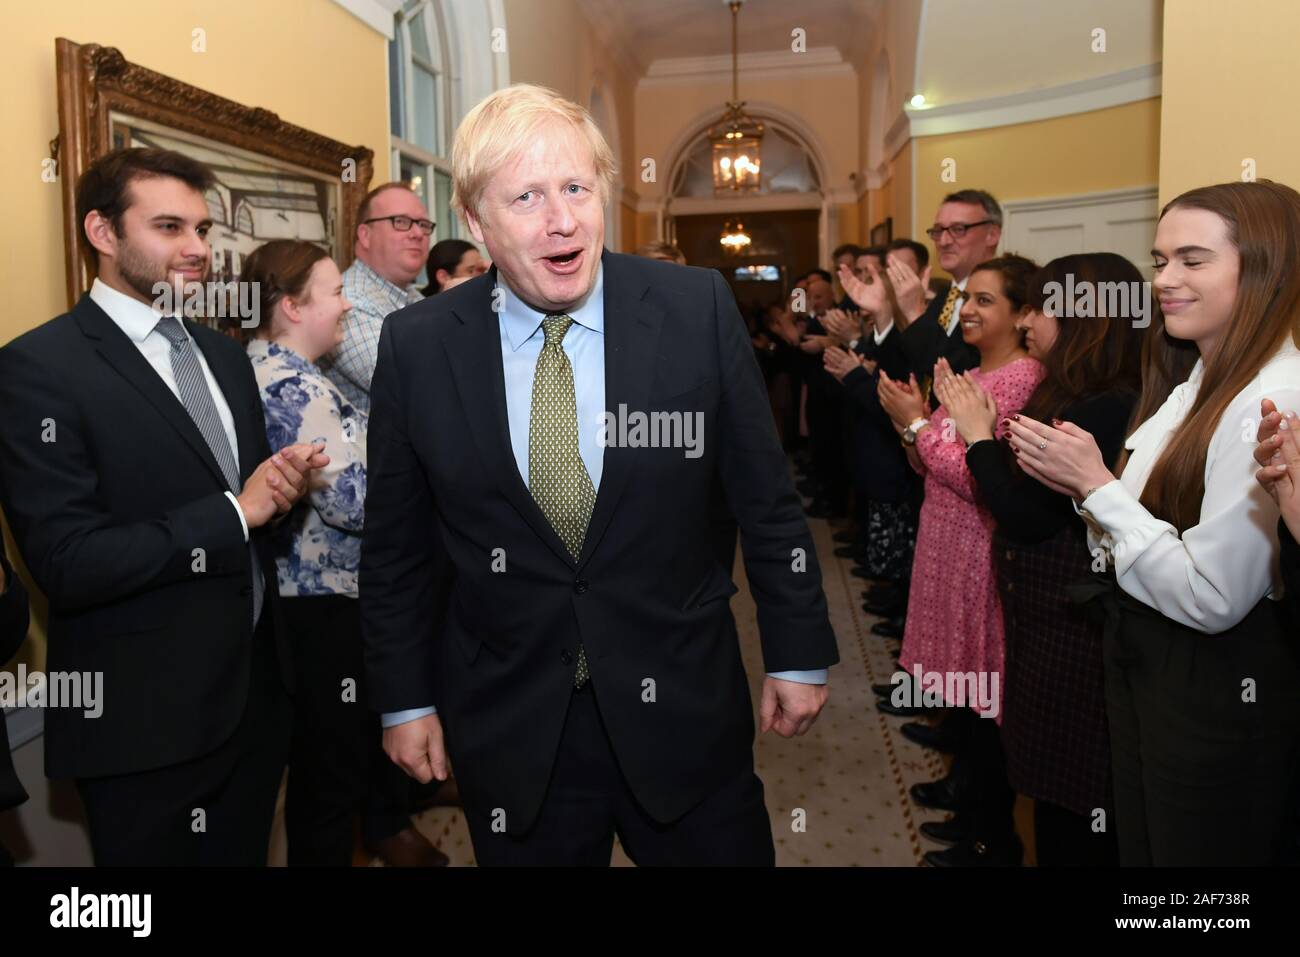 Prime Minister Boris Johnson is greeted by staff as he arrives back at 10 Downing Street, London, after meeting Queen Elizabeth II and accepting her invitation to form a new government after the Conservative Party was returned to power in the General Election with an increased majority. Stock Photo